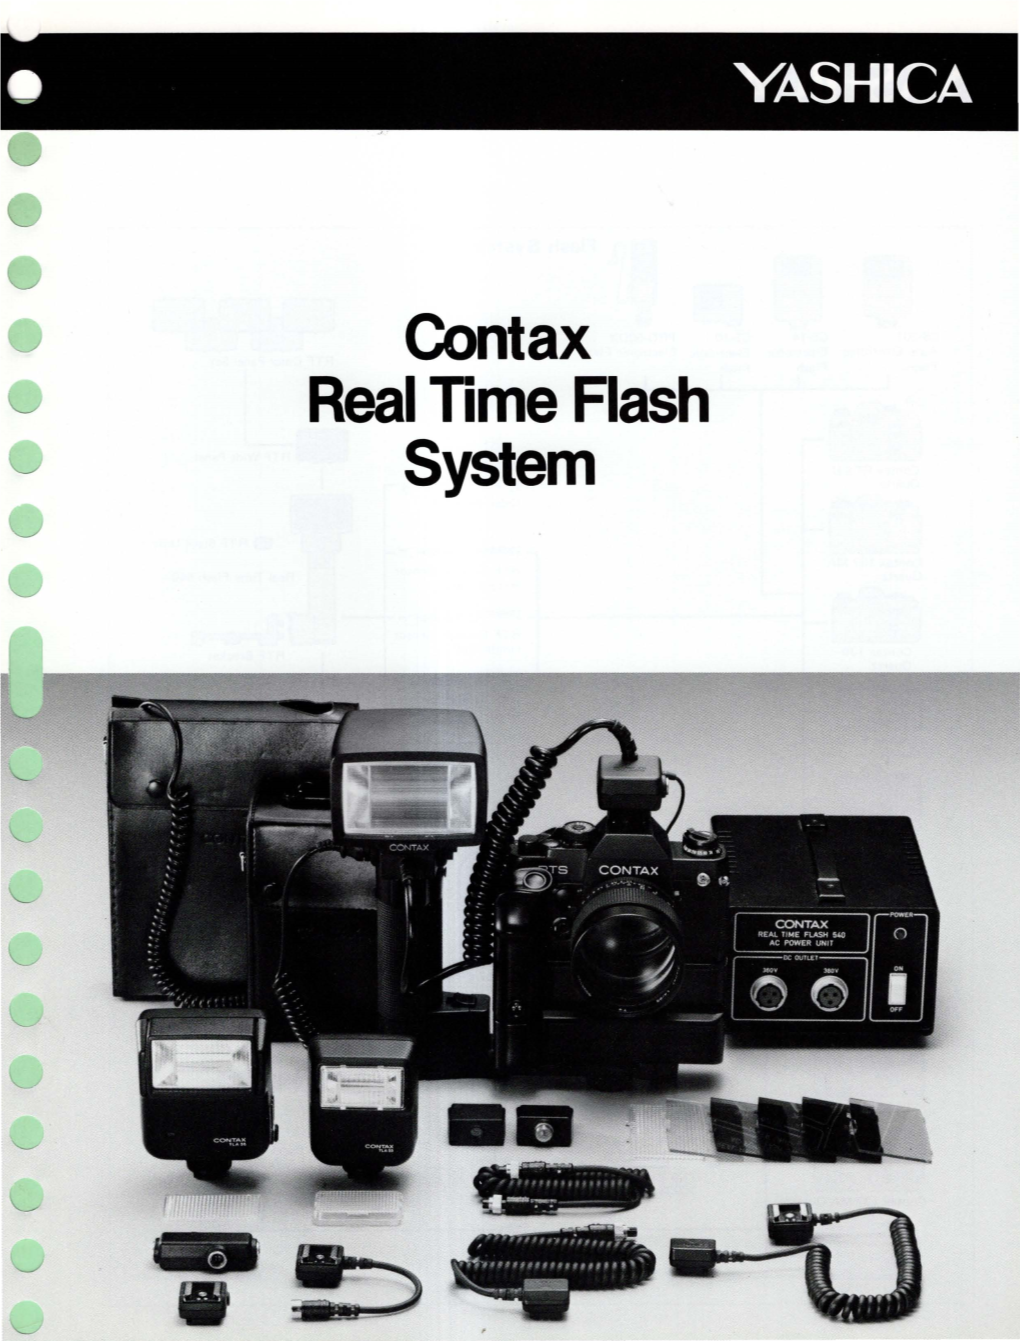 Contax Real Time Flash System YASHICA •